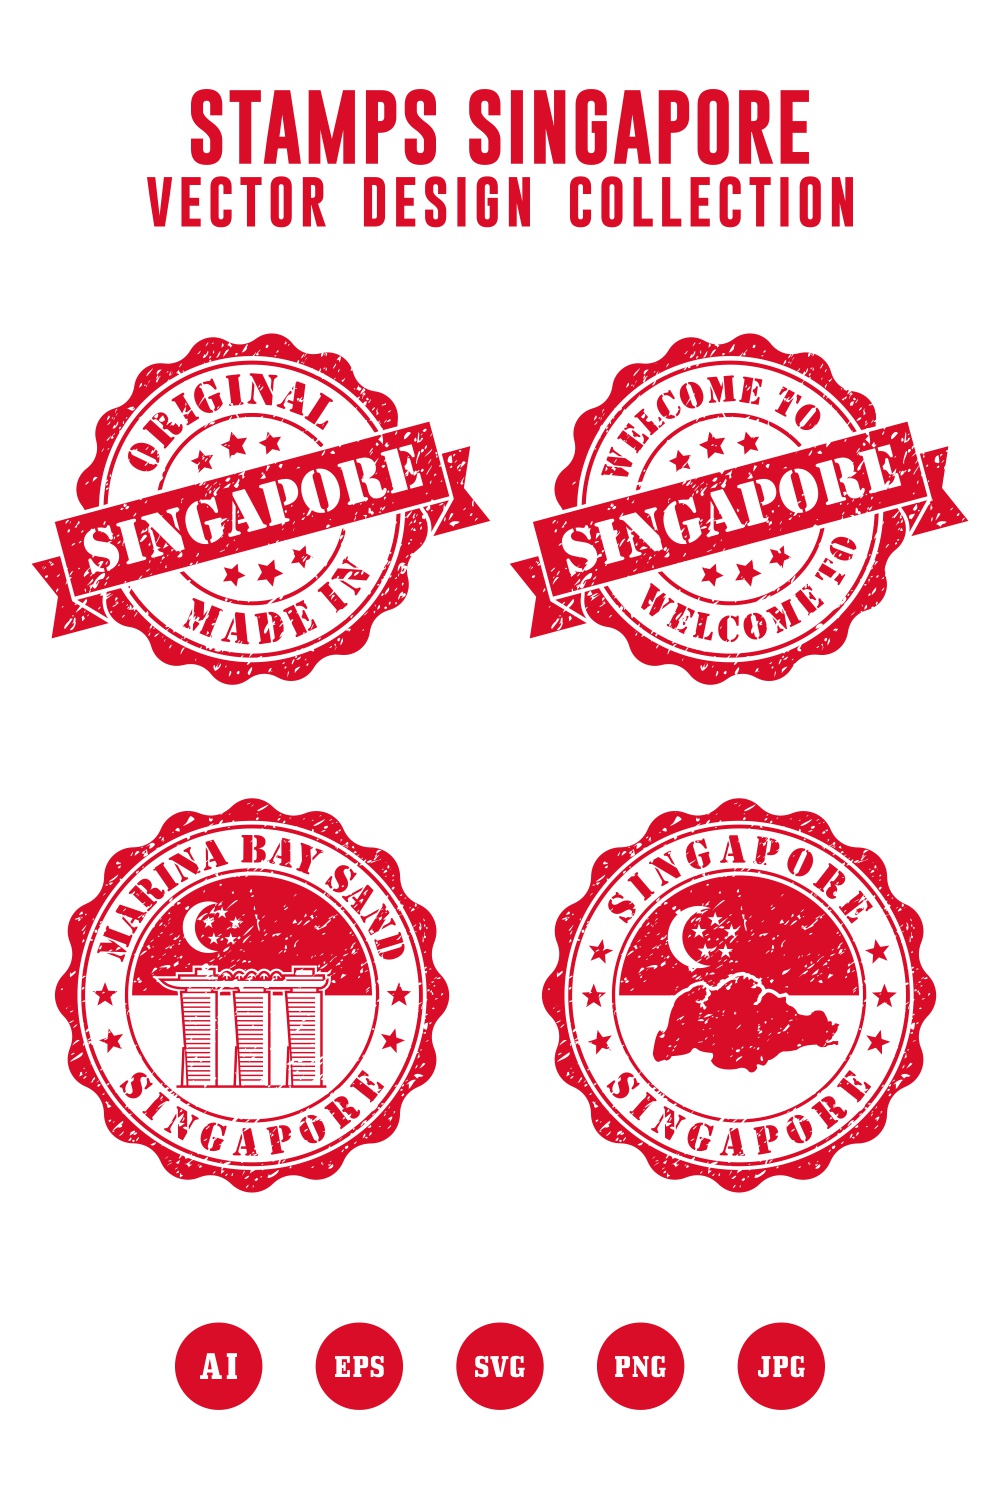 Welcome to Singapore stamps vector logo collection - $4 pinterest preview image.